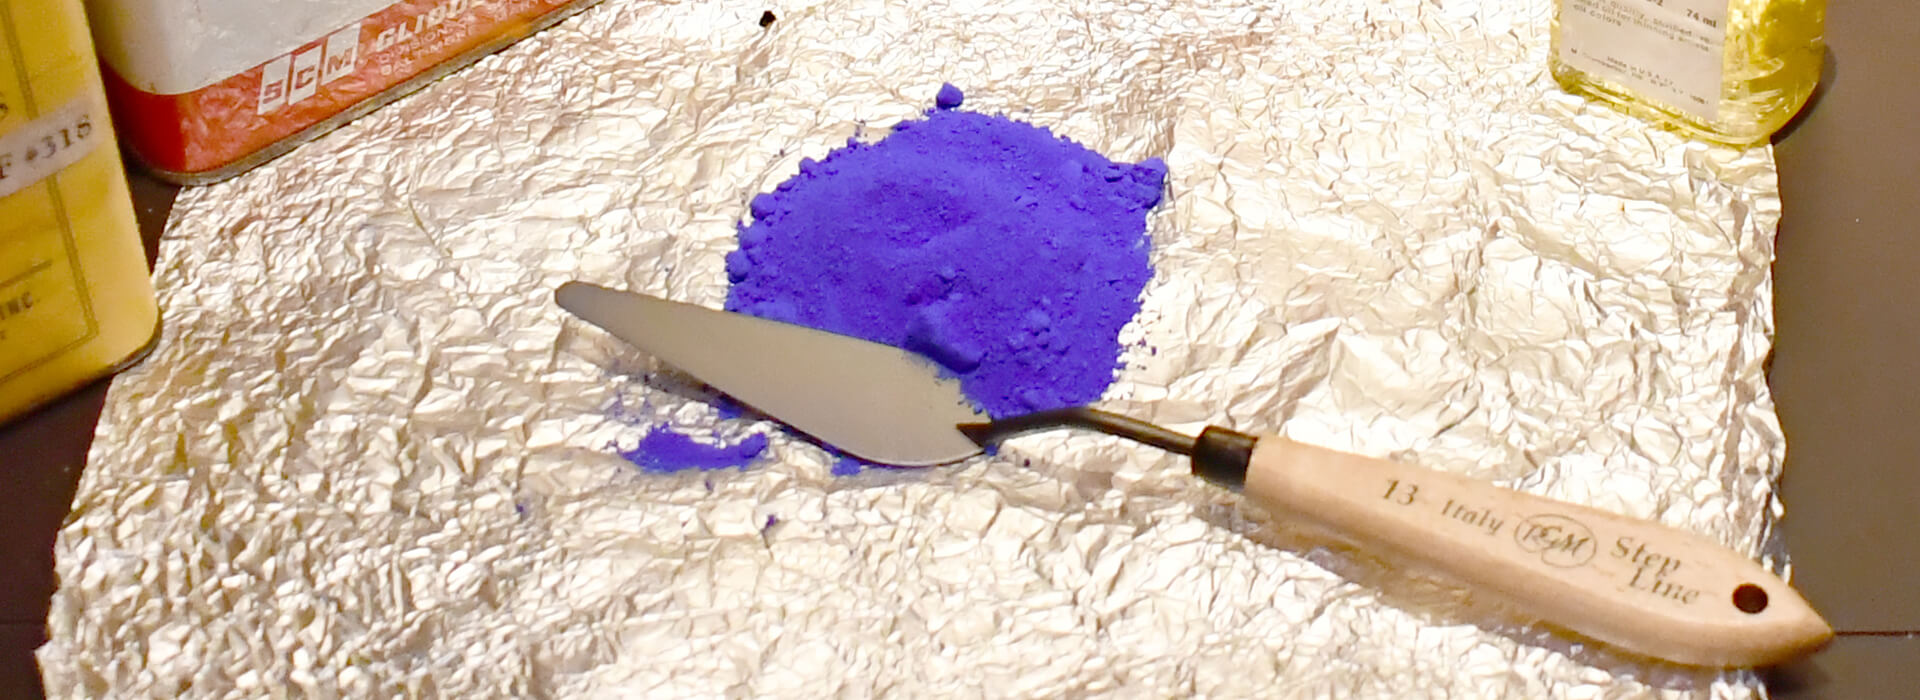 Closeup of a palette knife on aluminum foil with powdered blue pigment next to it